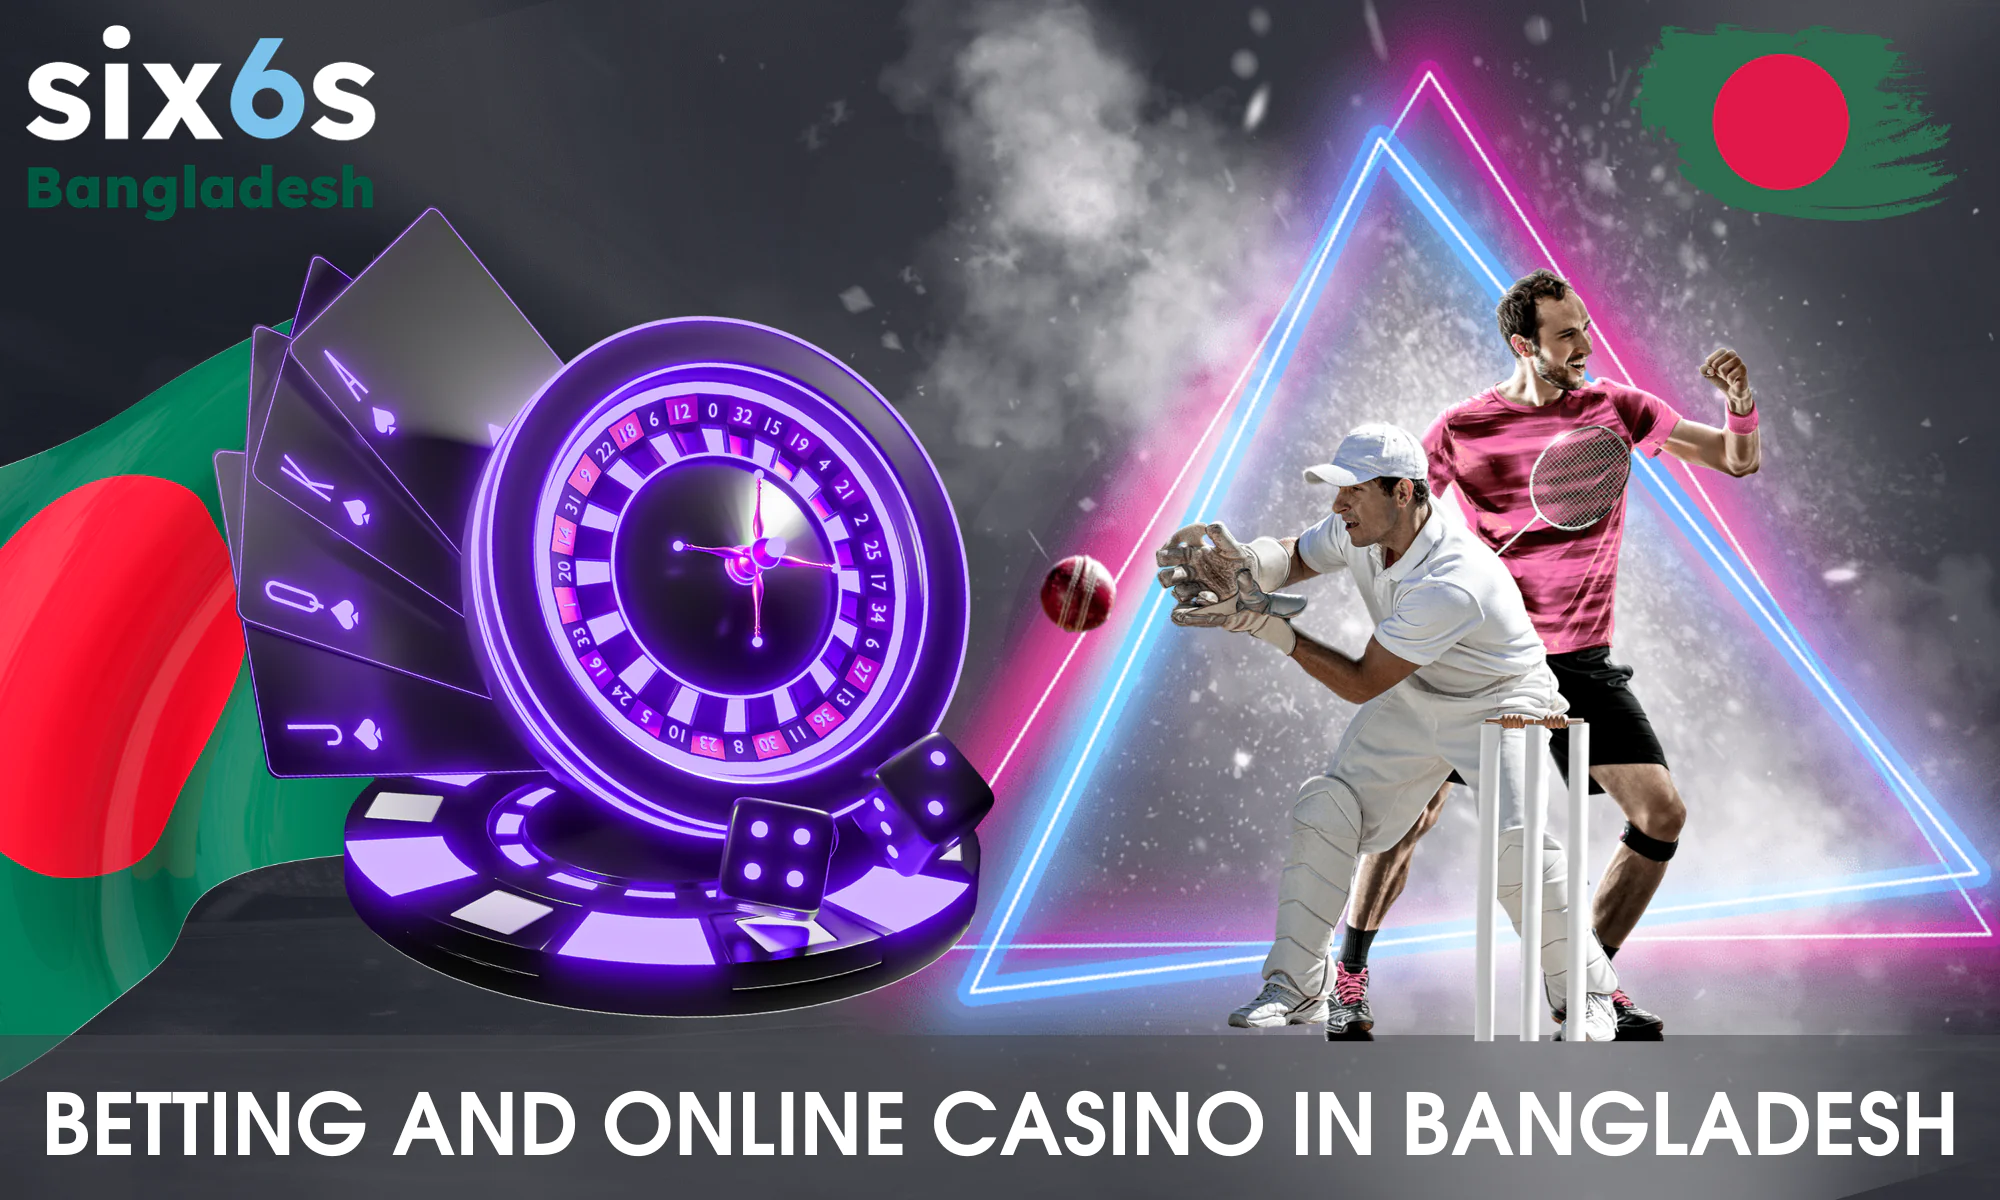 Casino and sports betting from Six6s for players from Bangladesh